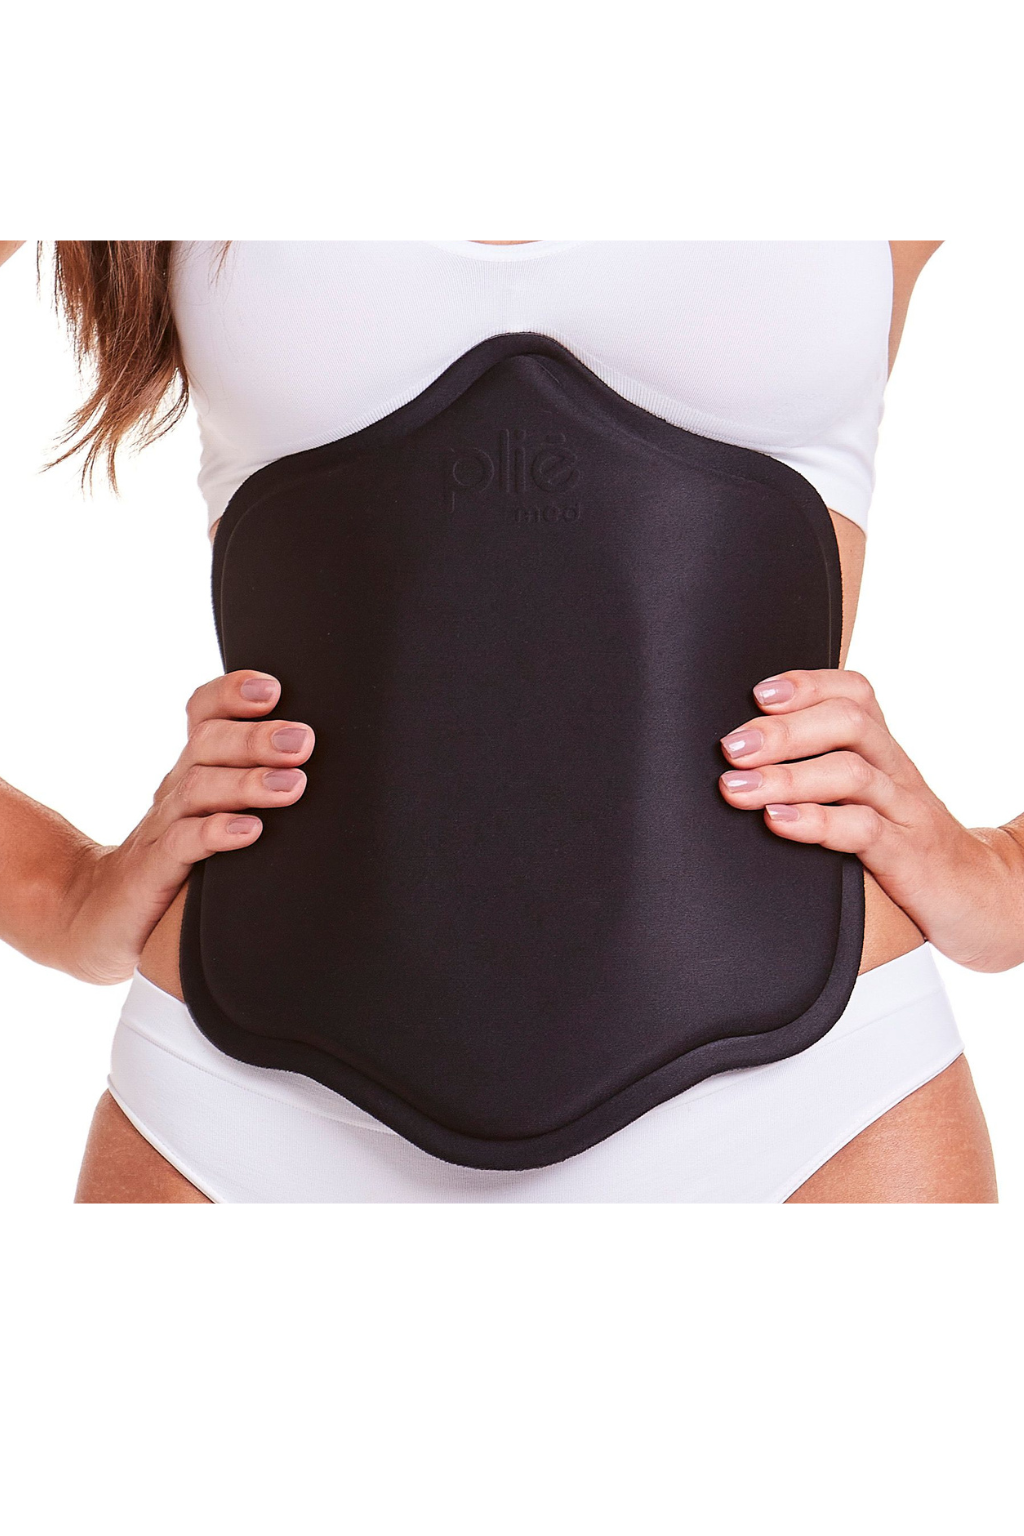 Advanced Unisex Abdominal Support pad for Postoperative Recovery